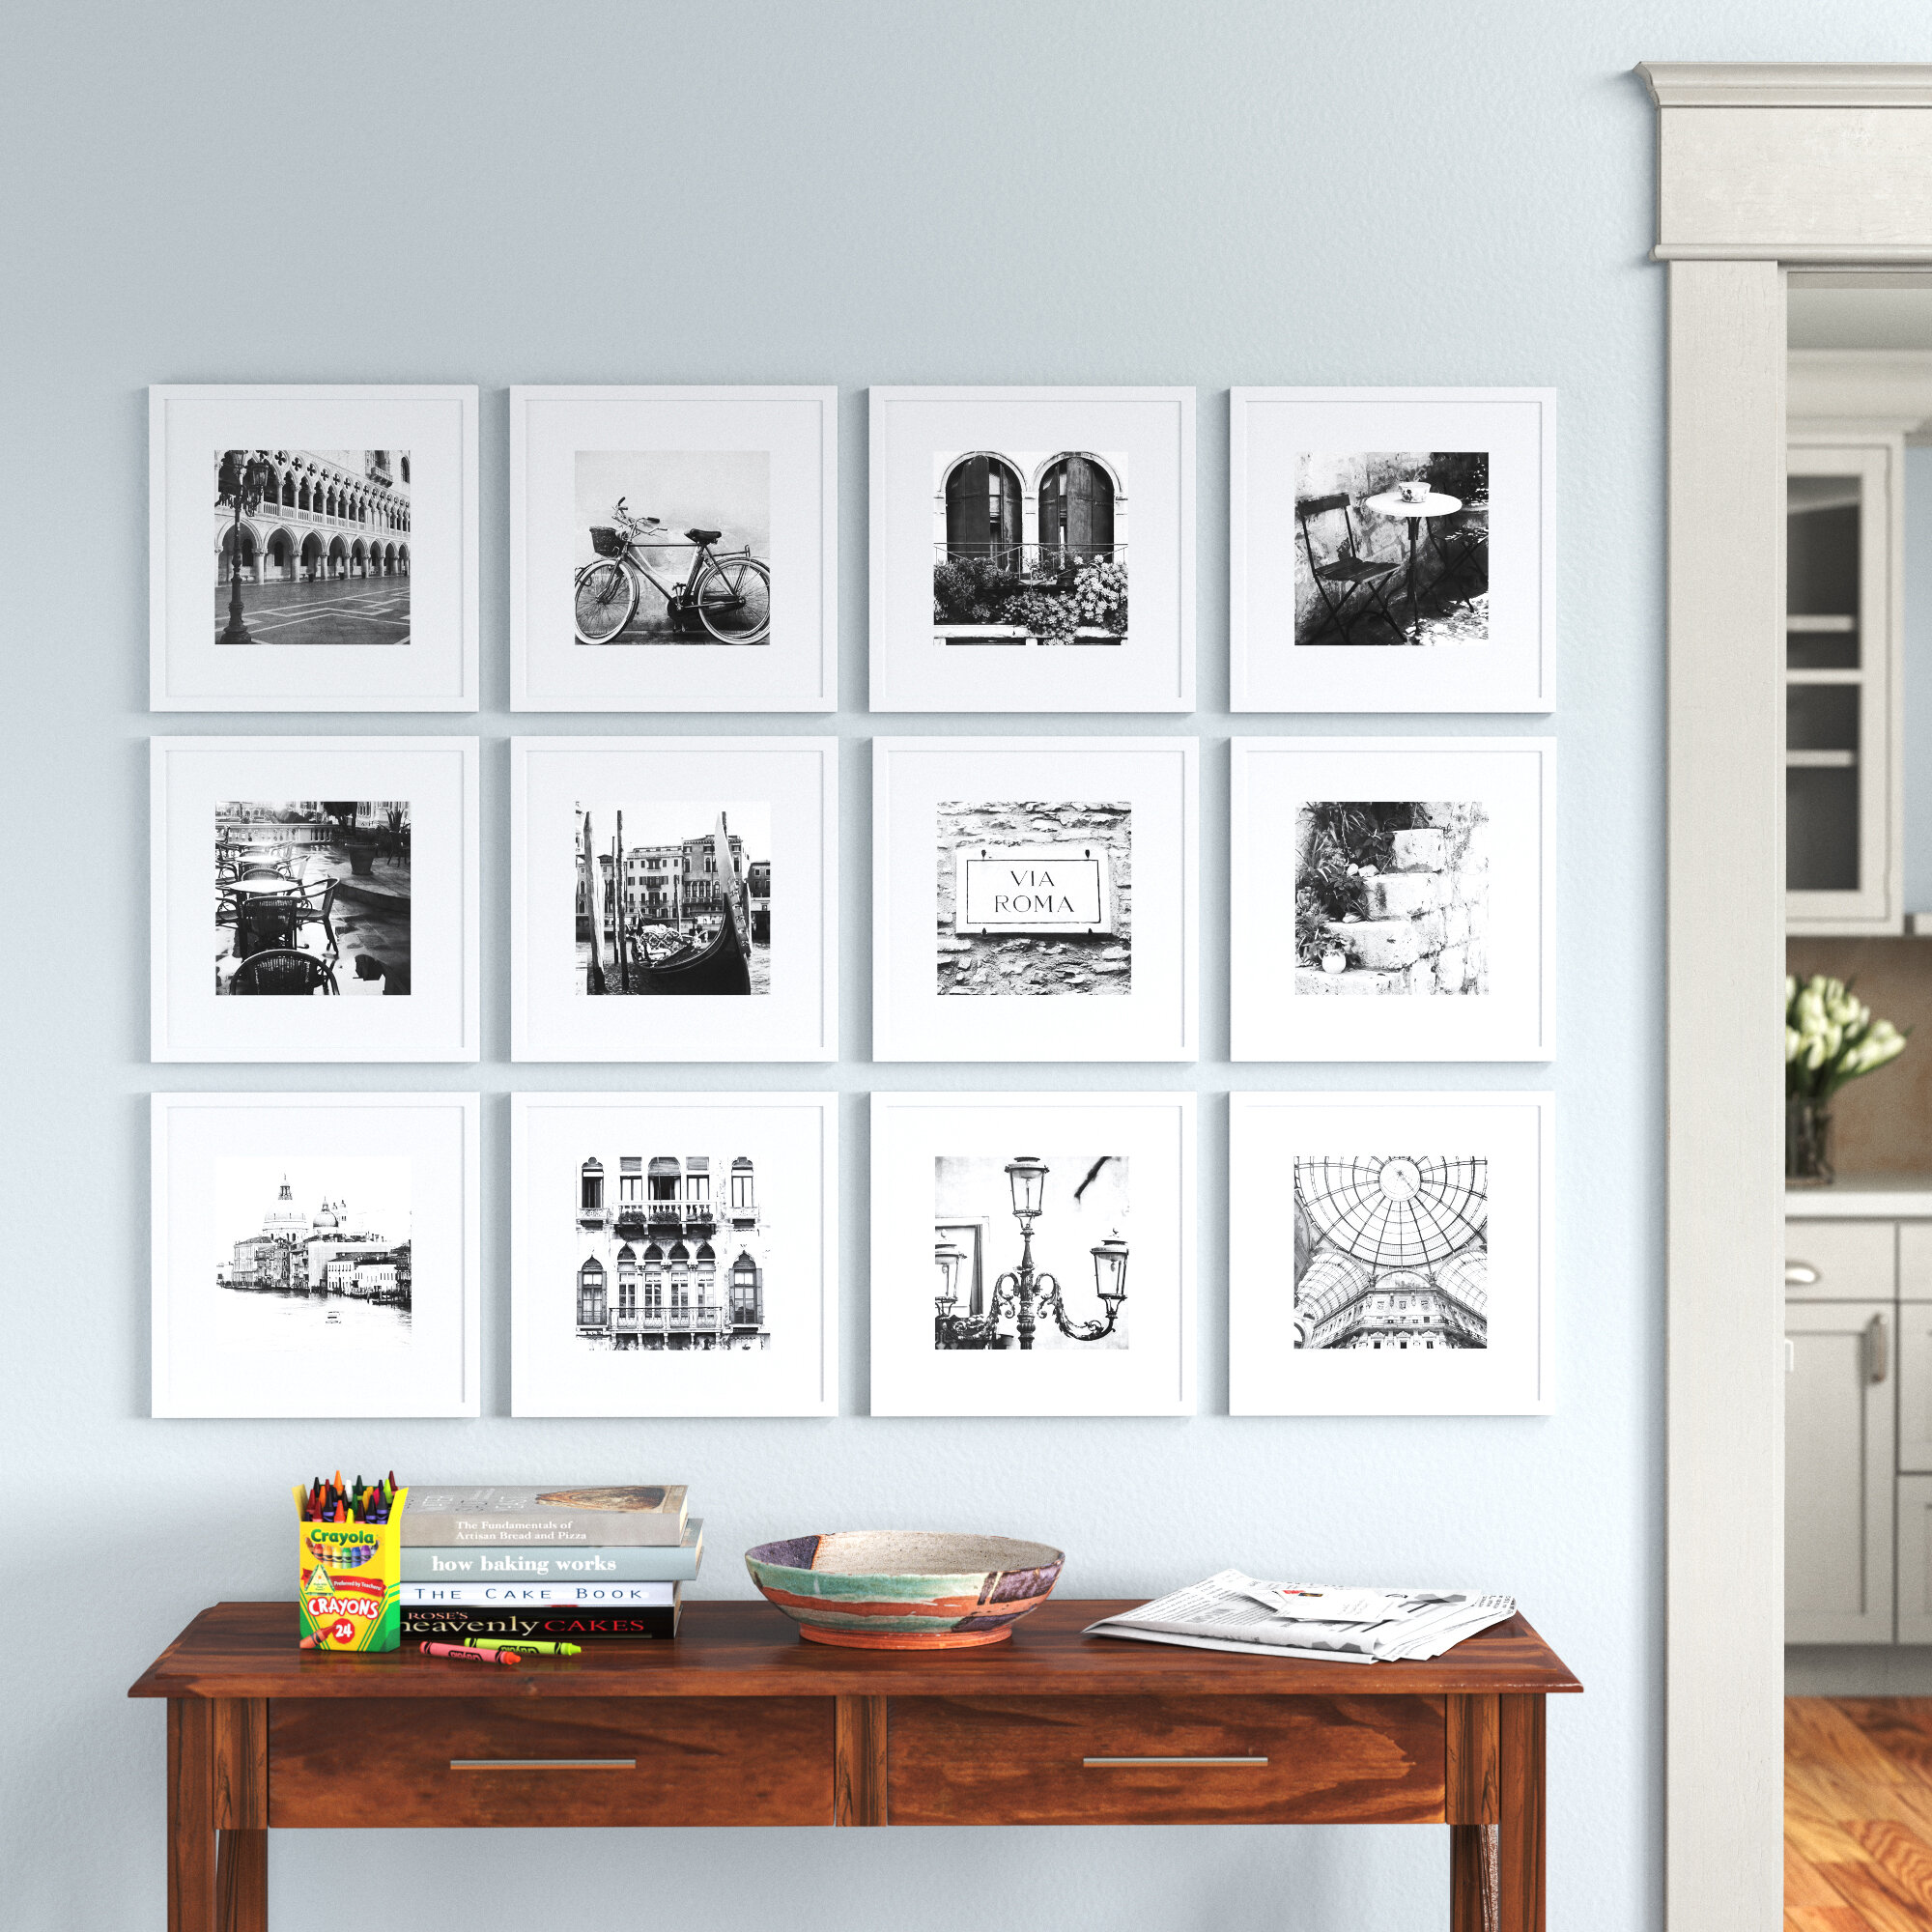 Gallery Wall Frame Set Photo Frame Set of 8 Square Picture Frames